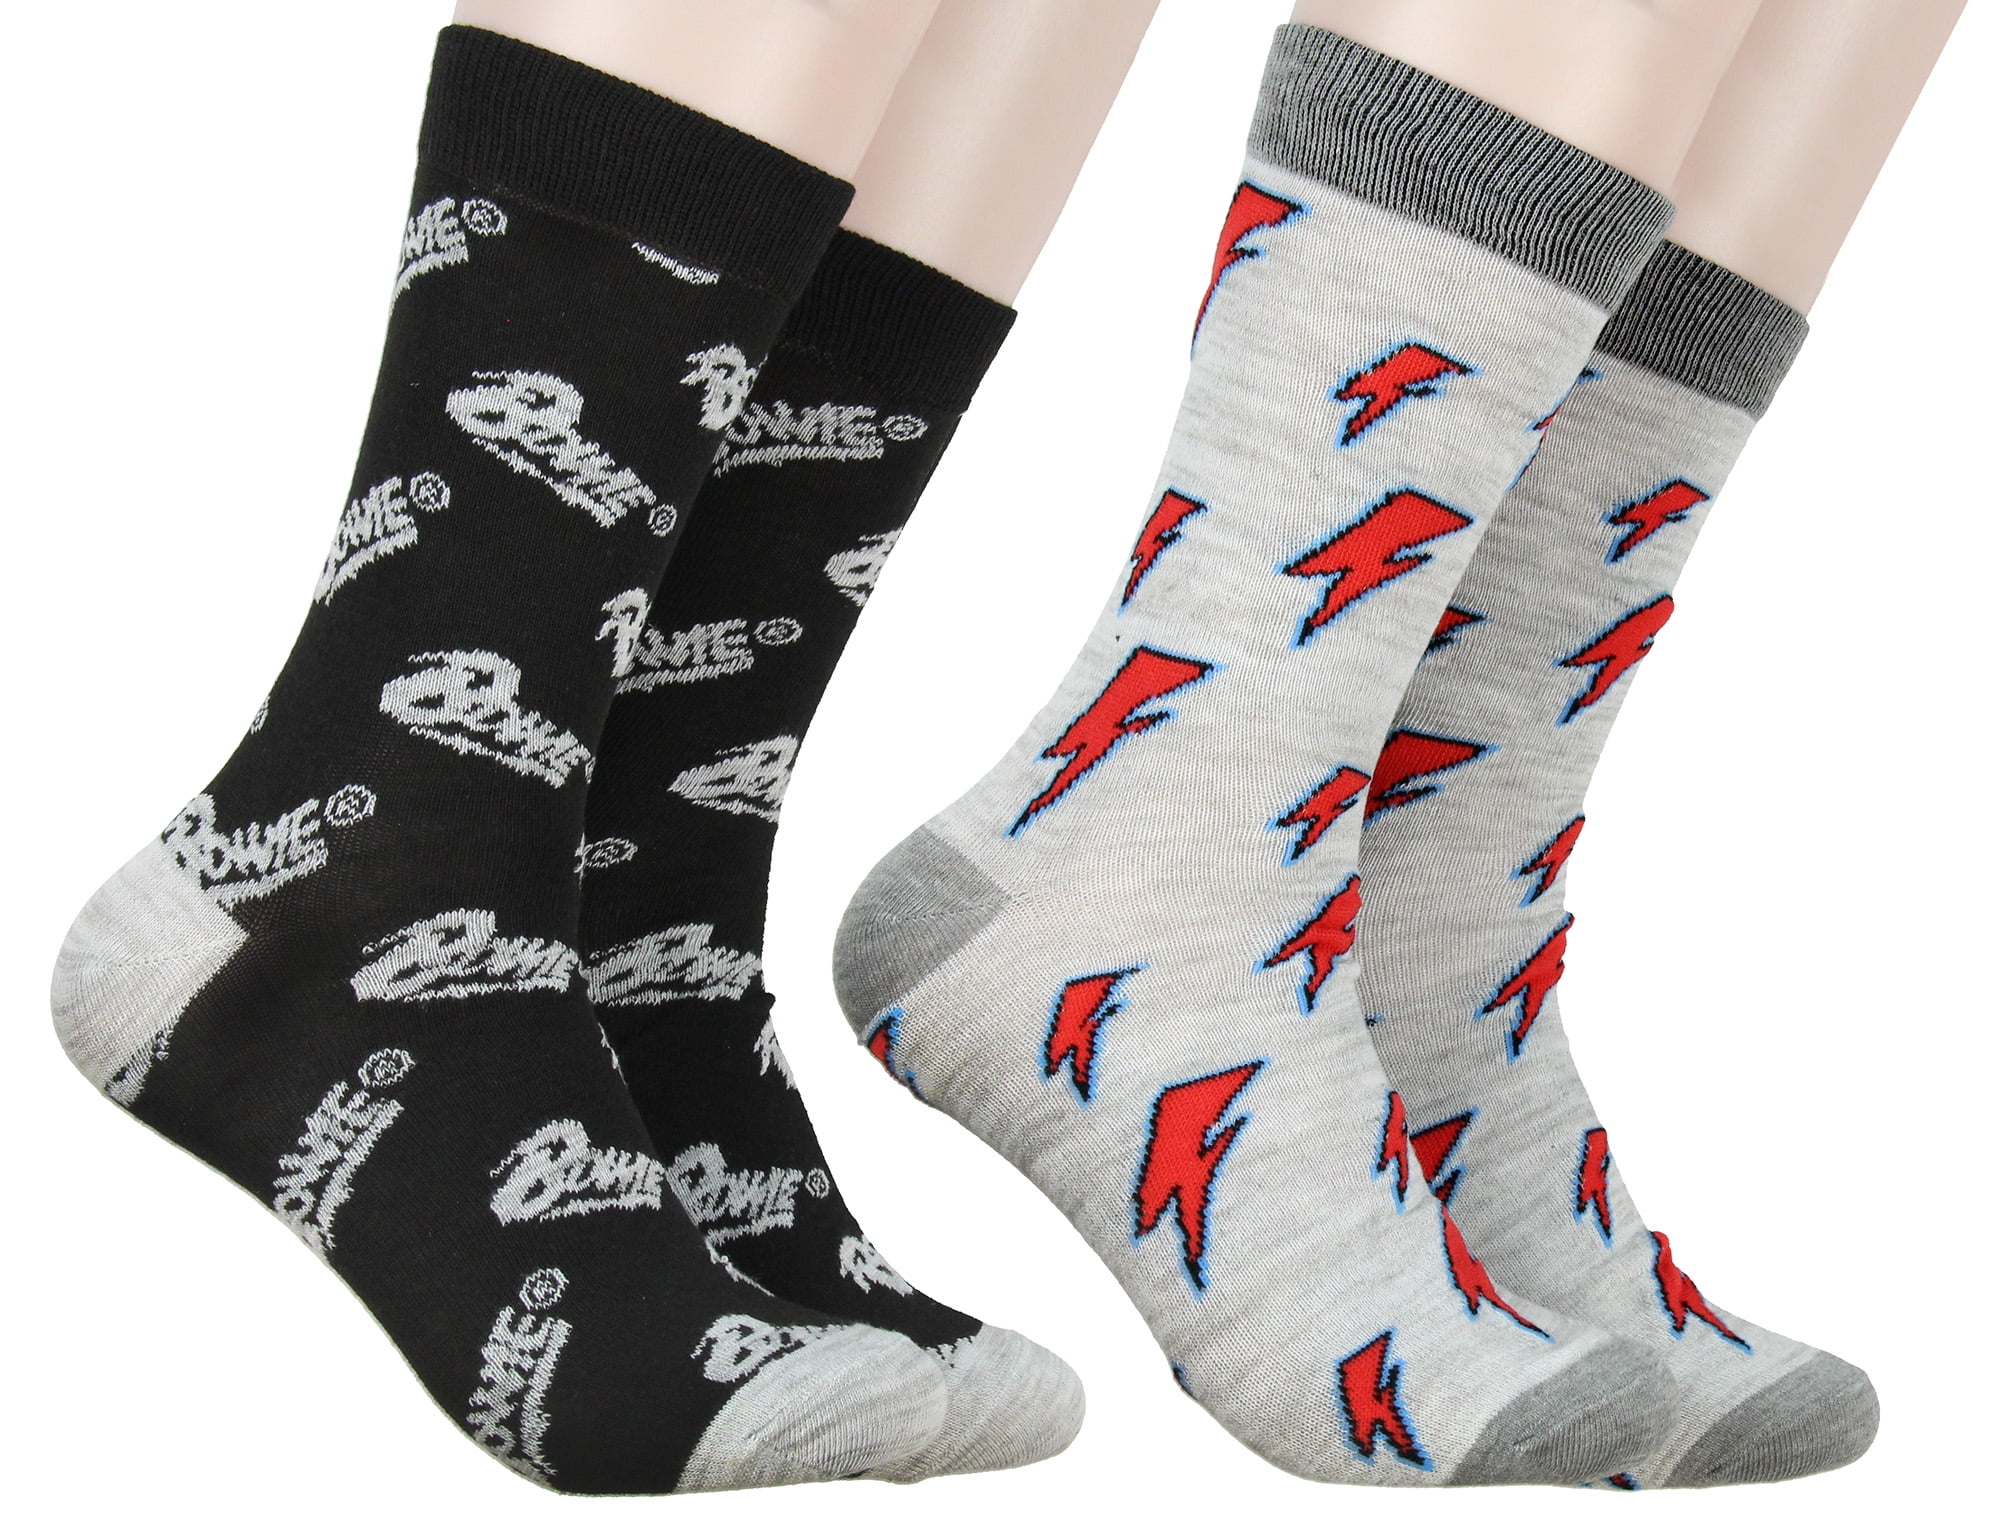 ThisWear Hard Rock Music Don't Keep Calm and Turn Up The Metal 1-Pair  Novelty Crew Socks